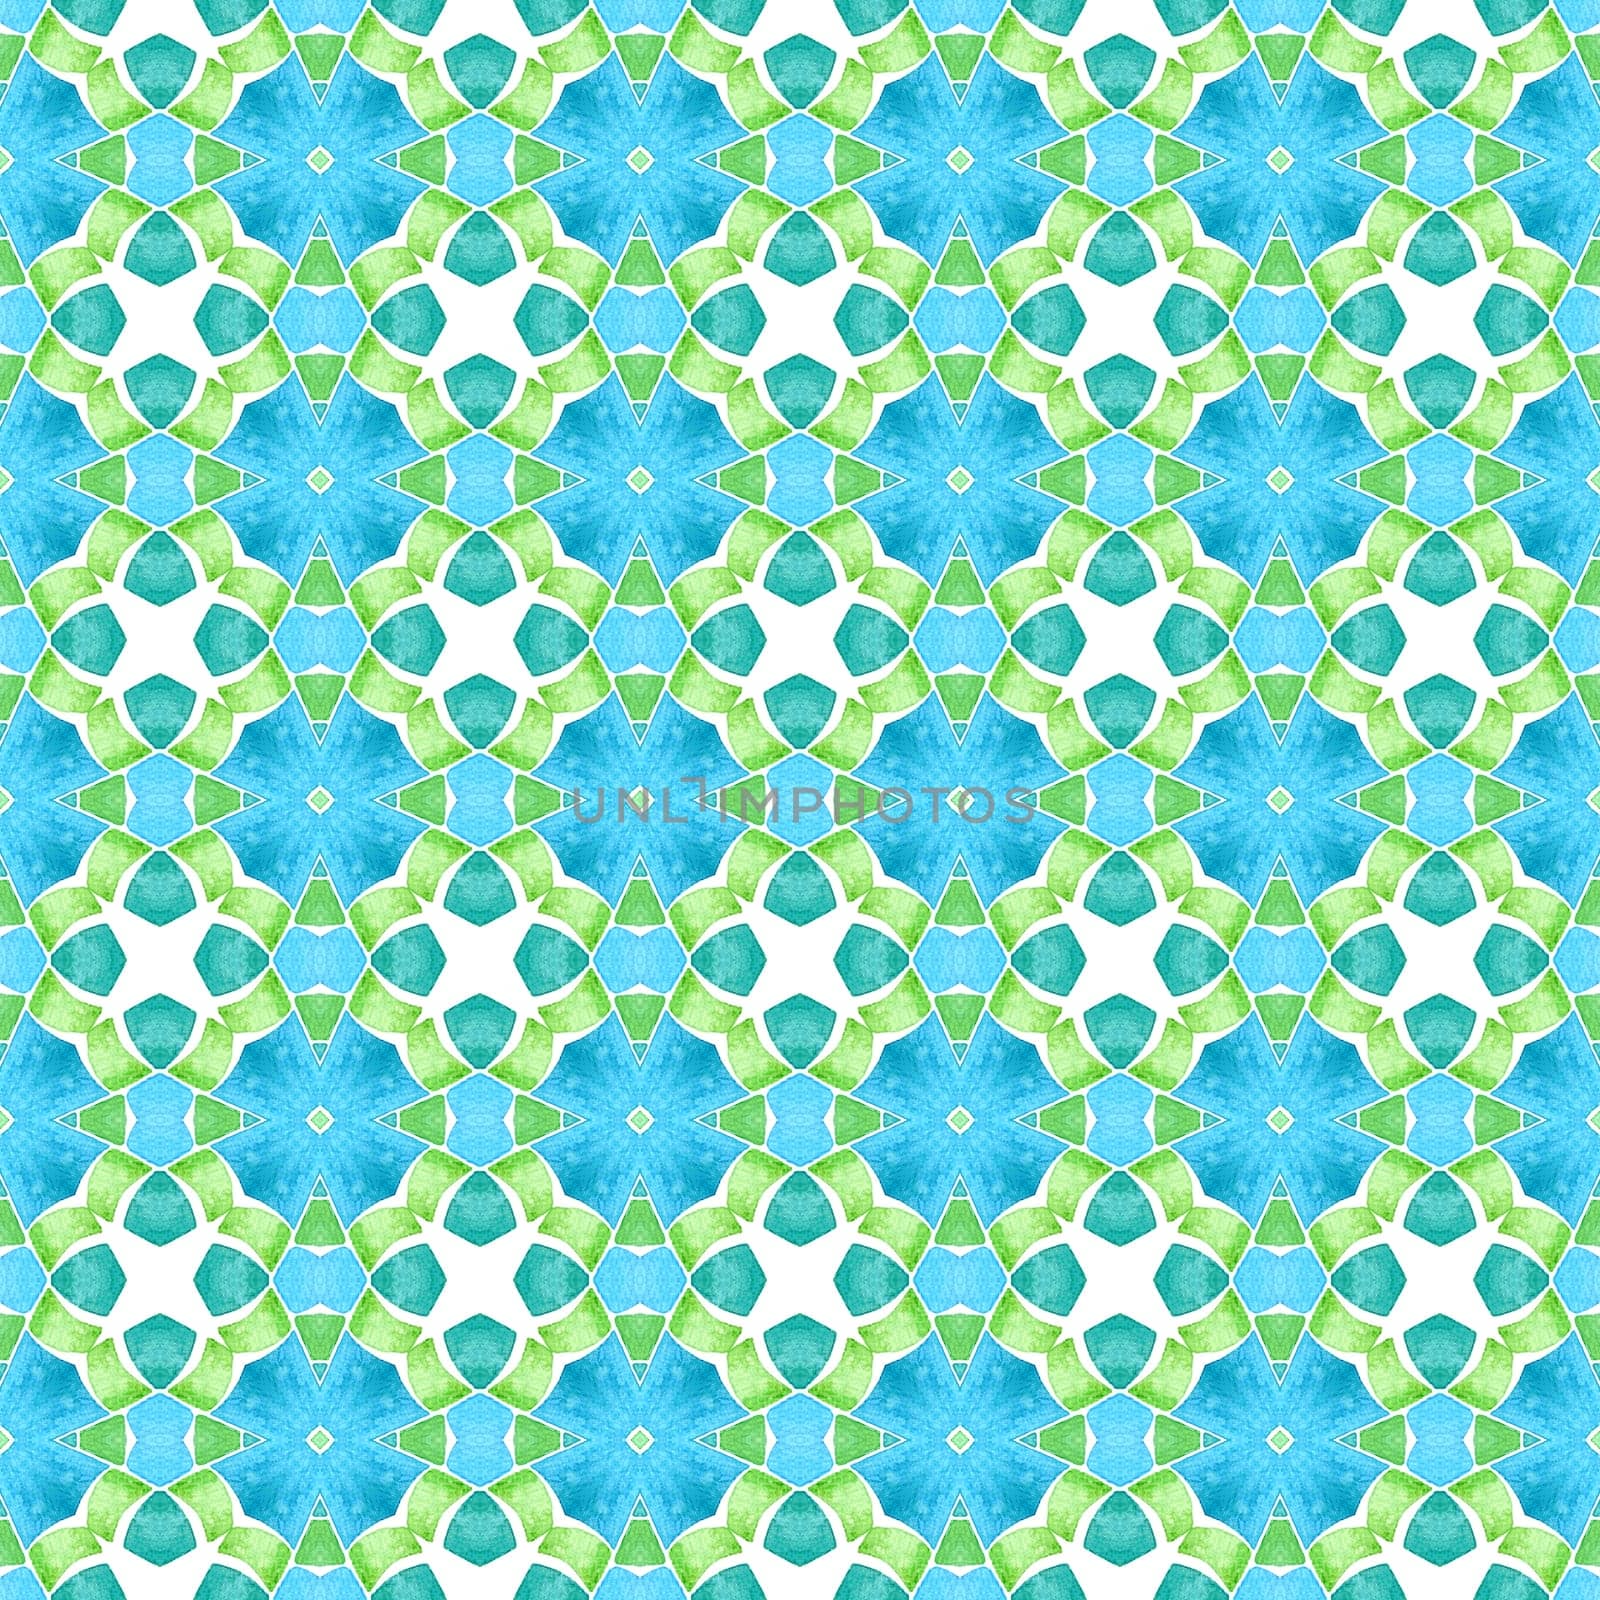 Textile ready radiant print, swimwear fabric, wallpaper, wrapping. Green brilliant boho chic summer design. Watercolor ikat repeating tile border. Ikat repeating swimwear design.